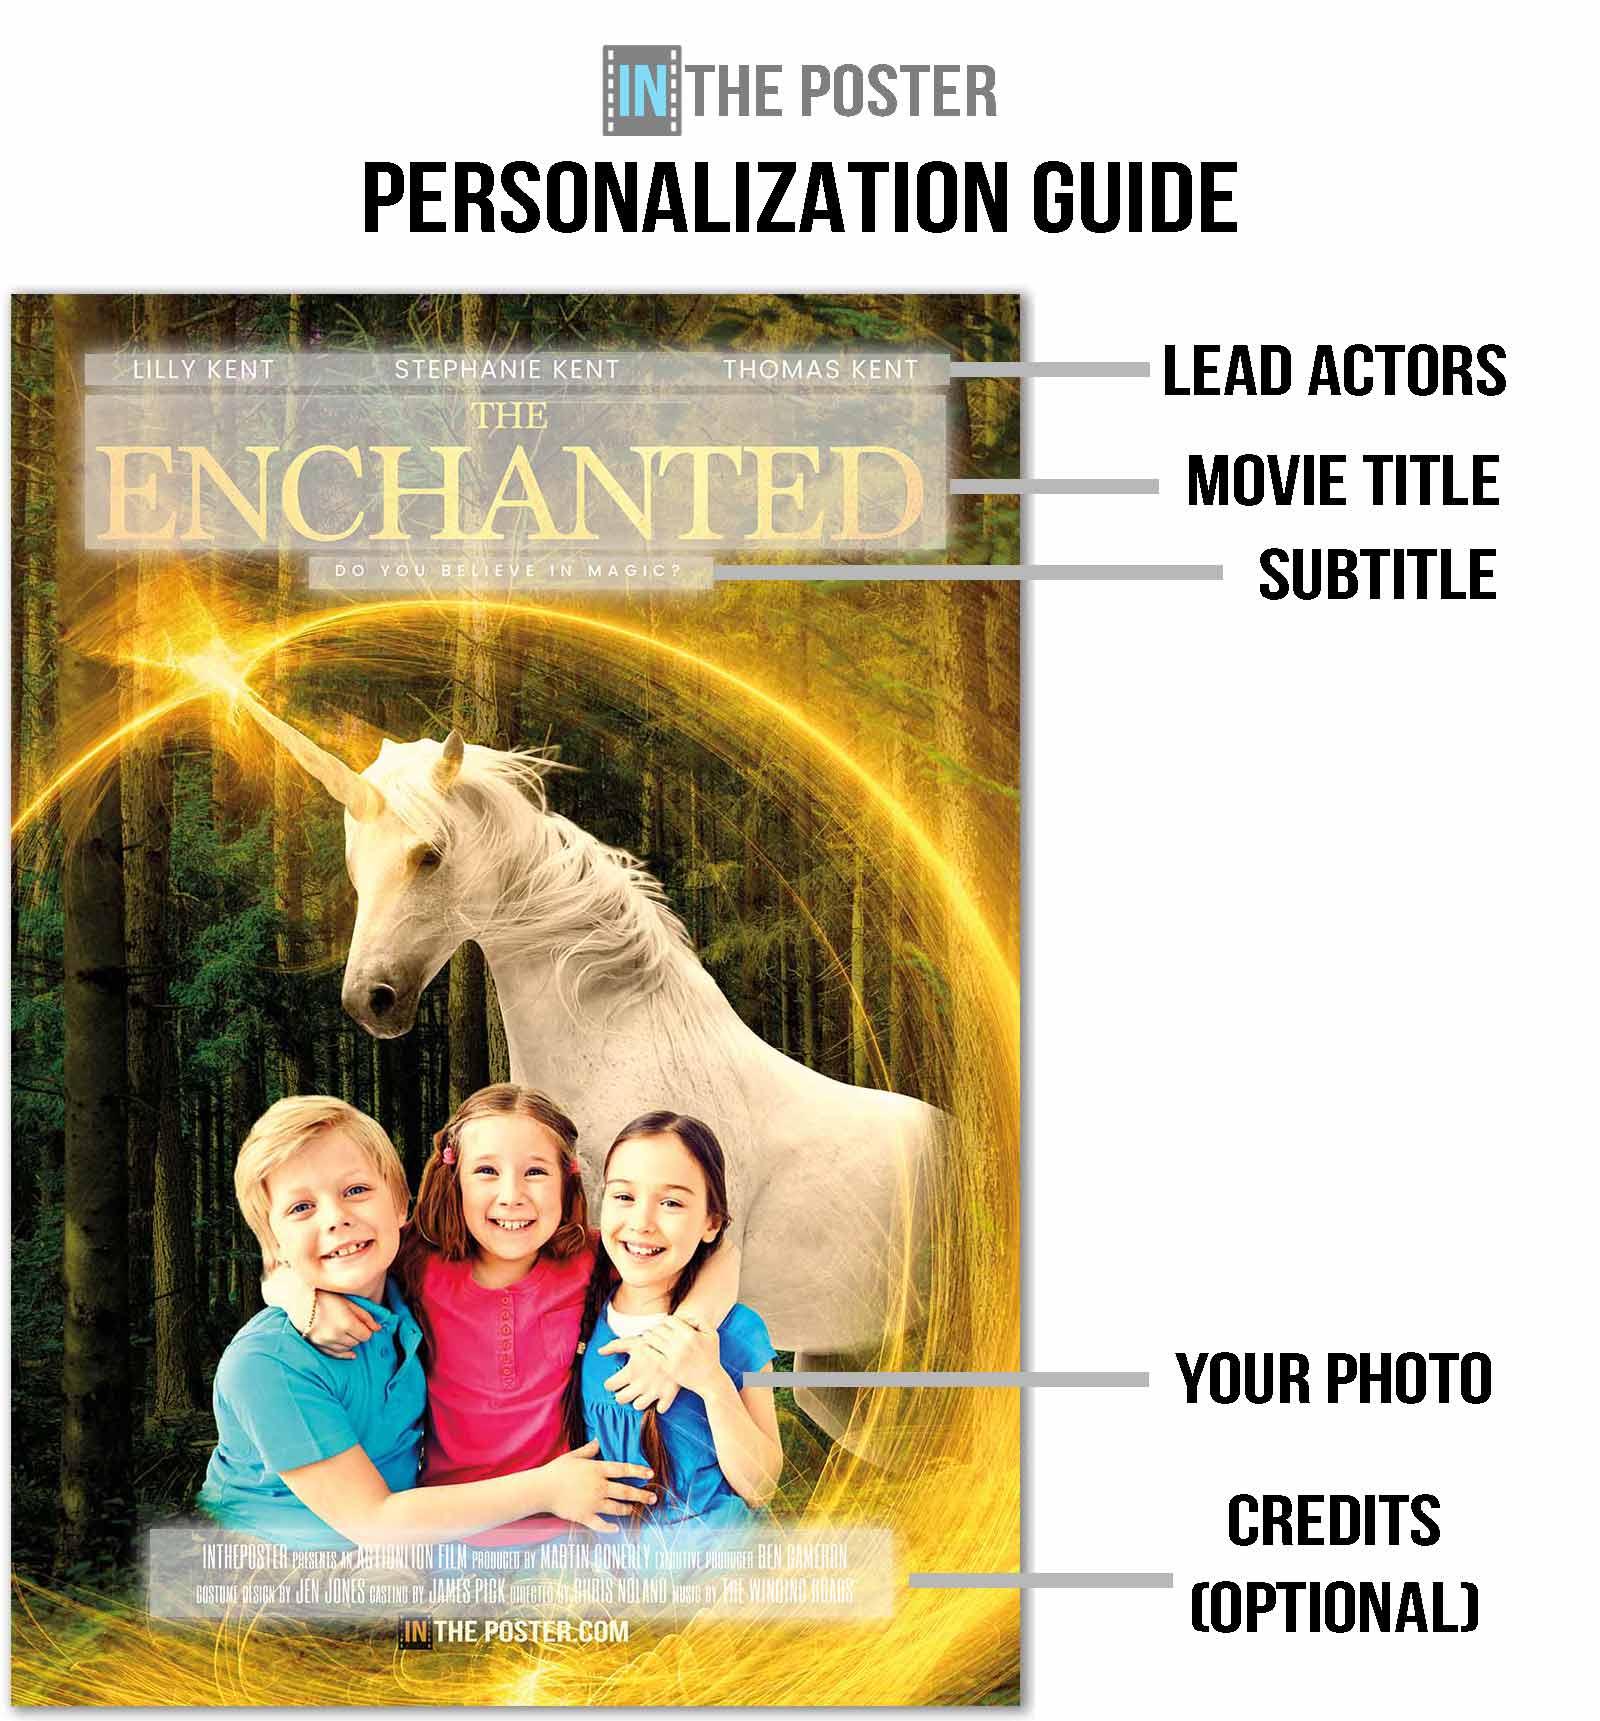 A diagram showing how to personalize the enchanted unicorn movie poster design